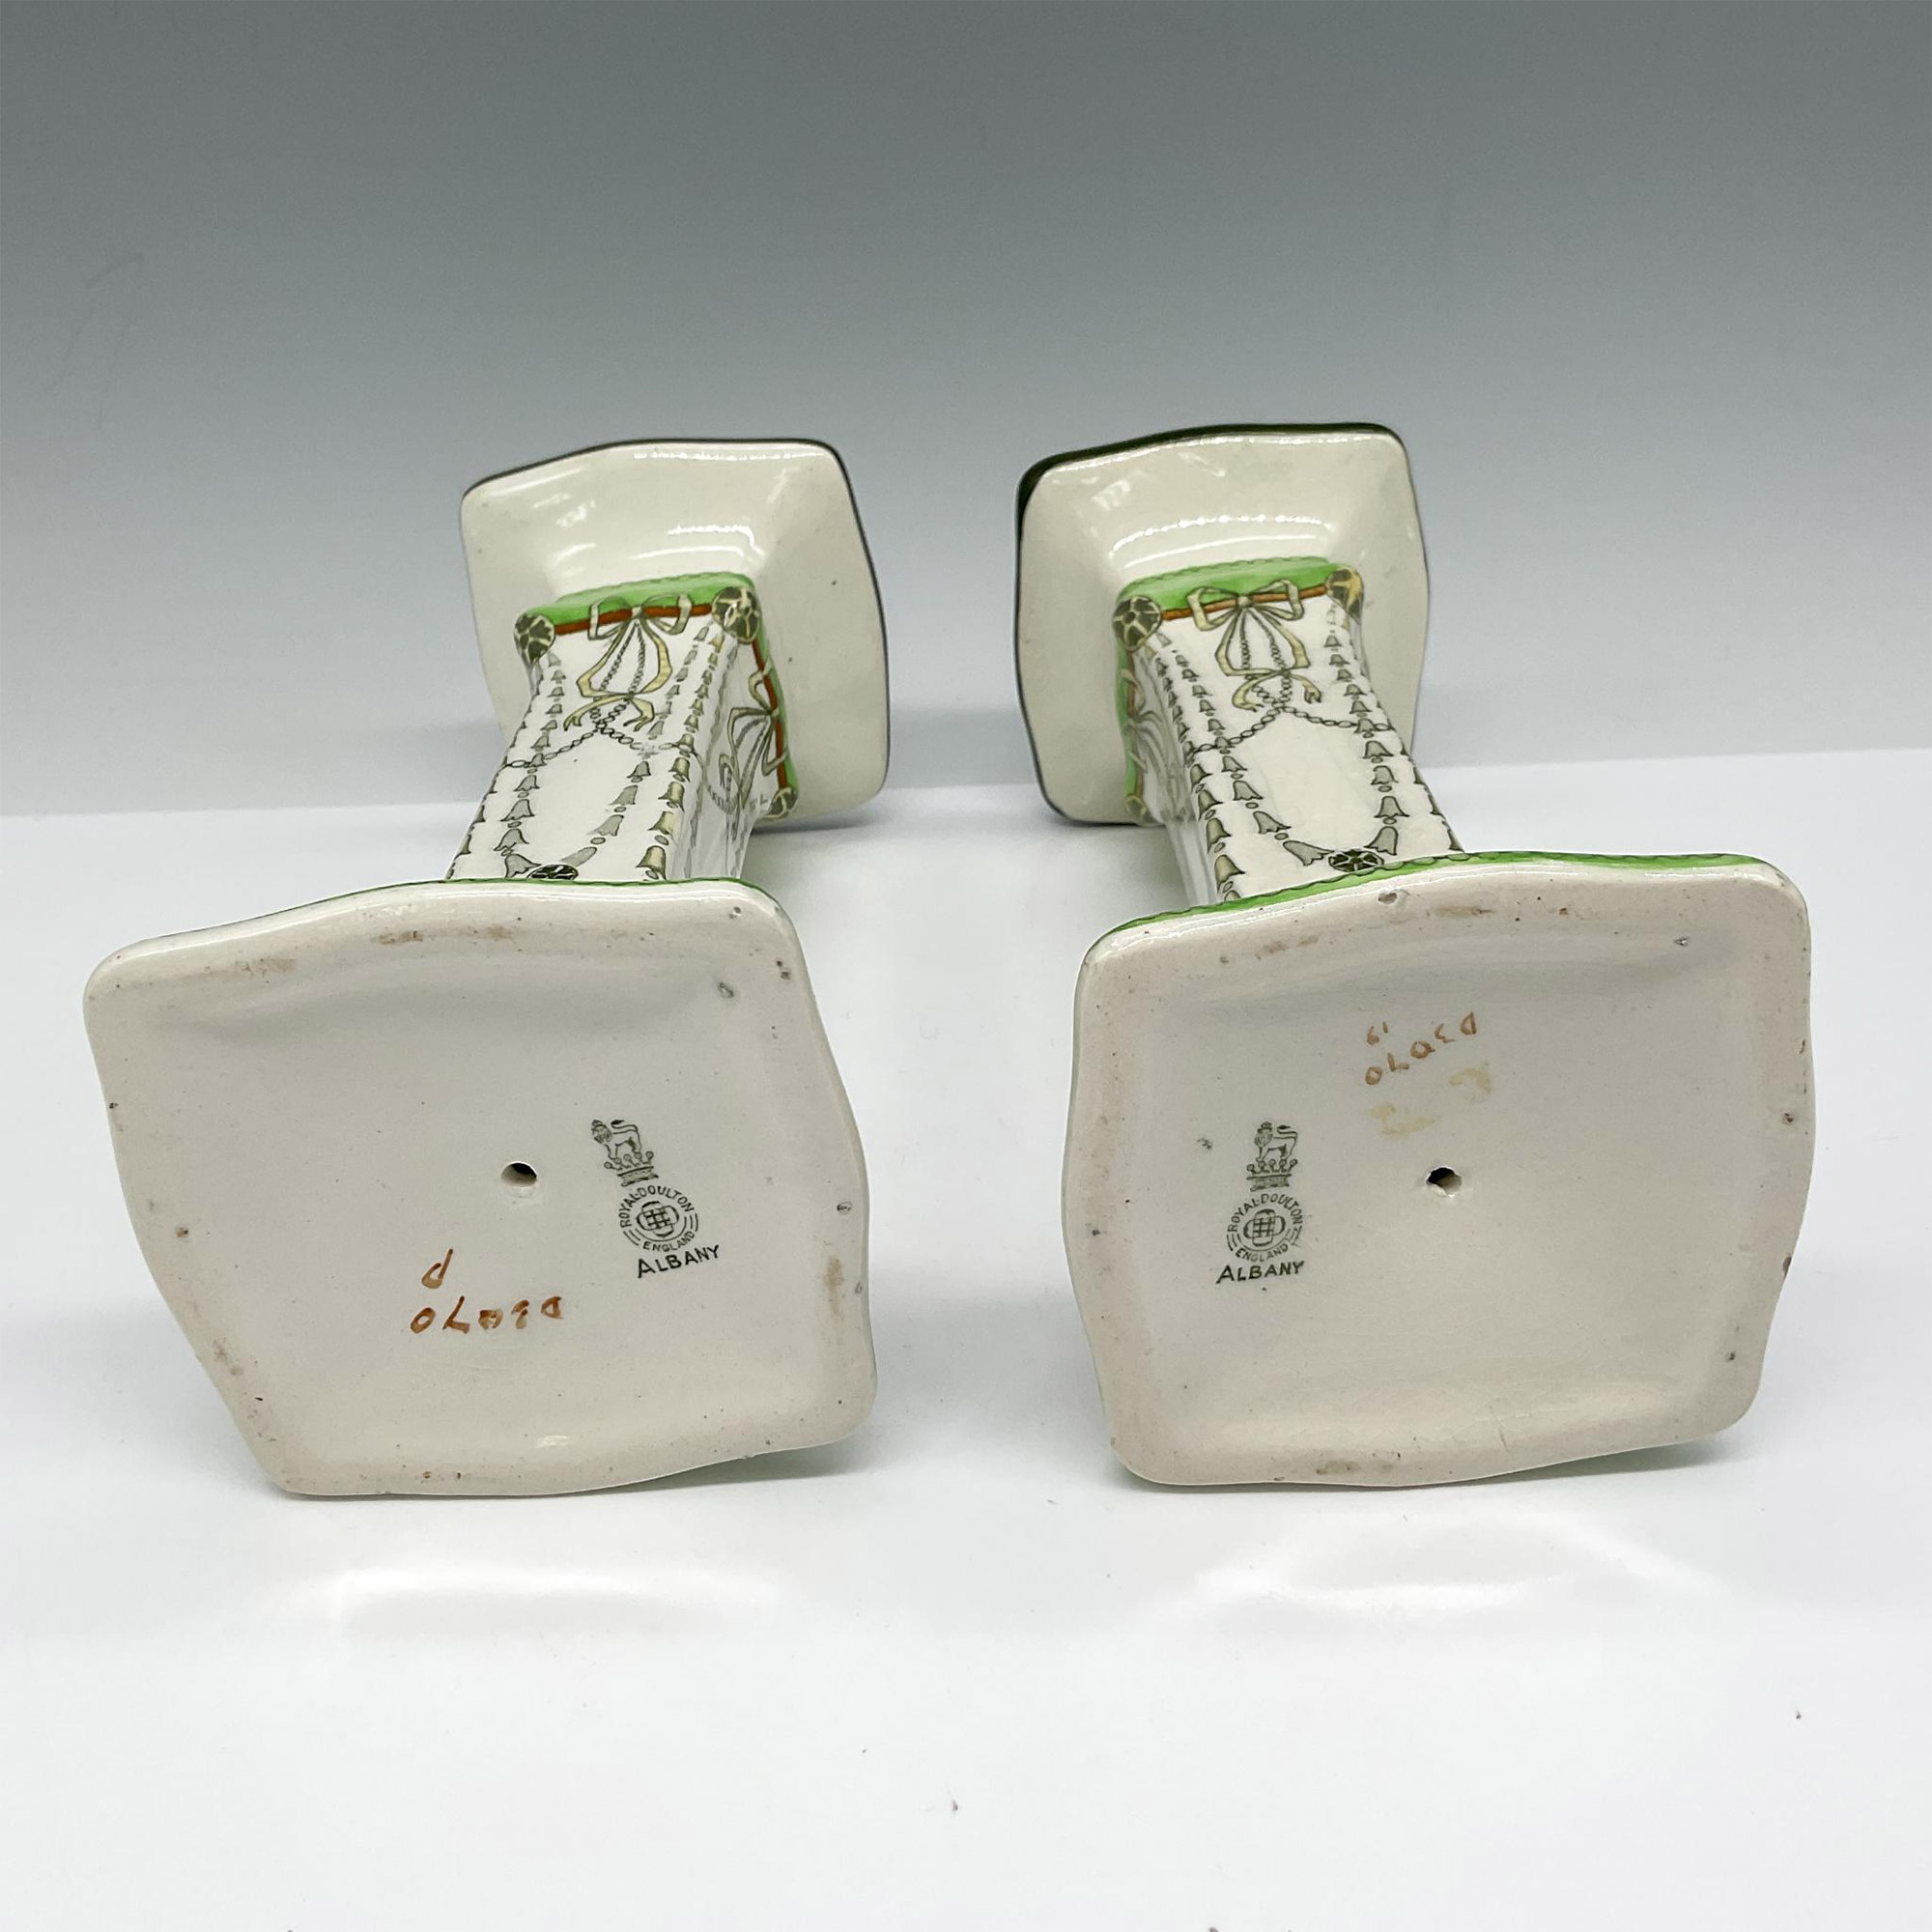 Pair of Royal Doulton Porcelain Candle Holders, Albany D3070 - Image 3 of 3